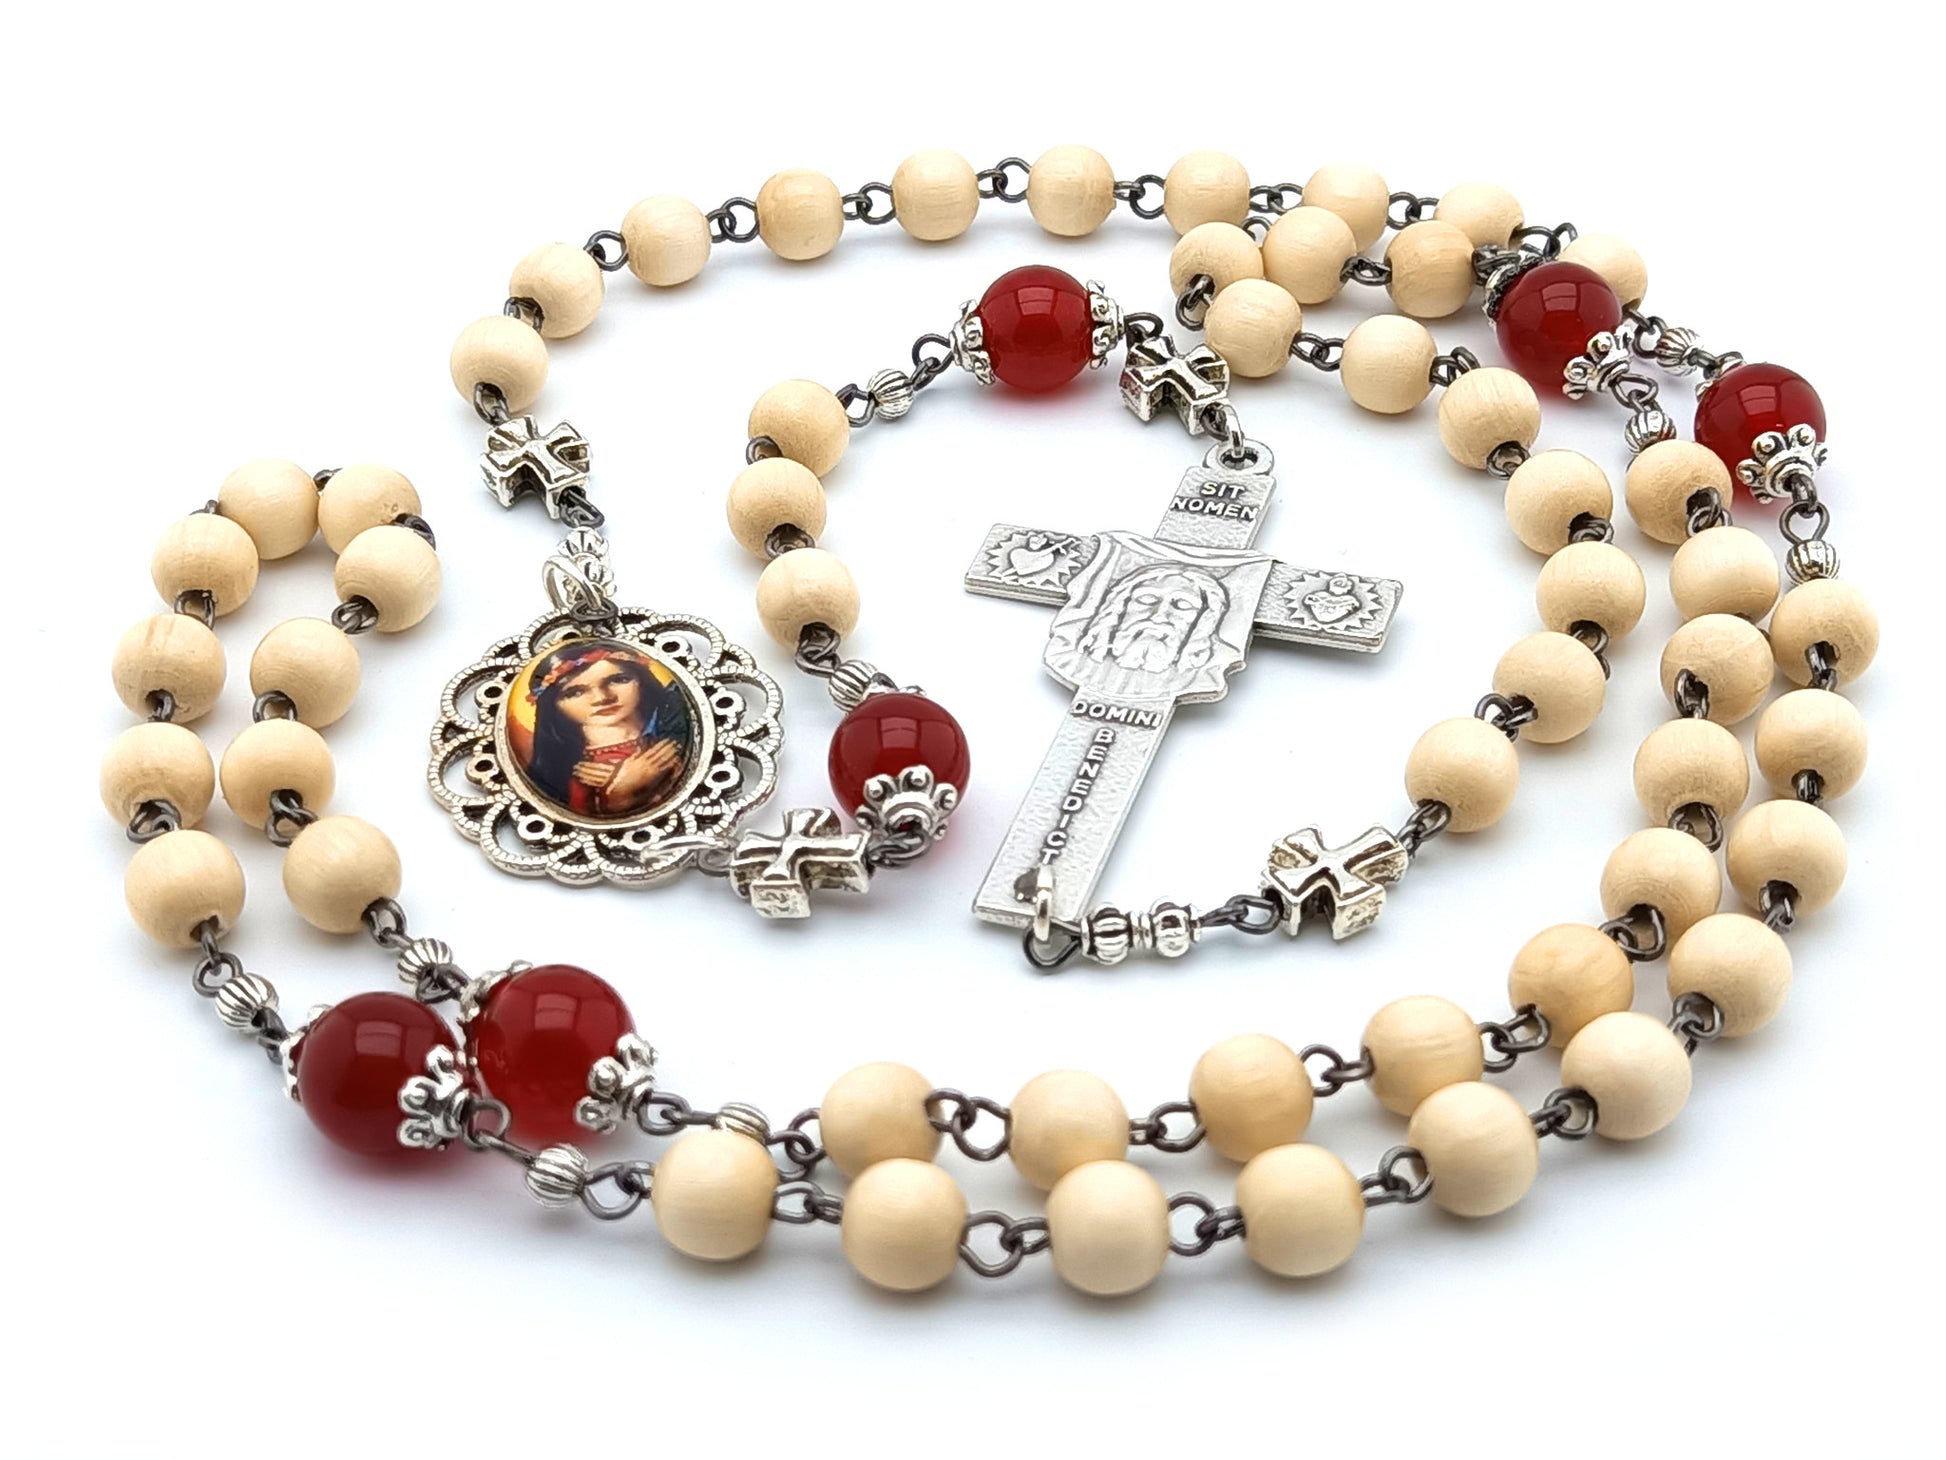 Saint Philomena circular unique rosary beads in white wood and ruby gemstone beads, picture centre medal and Holt Face crucifix.